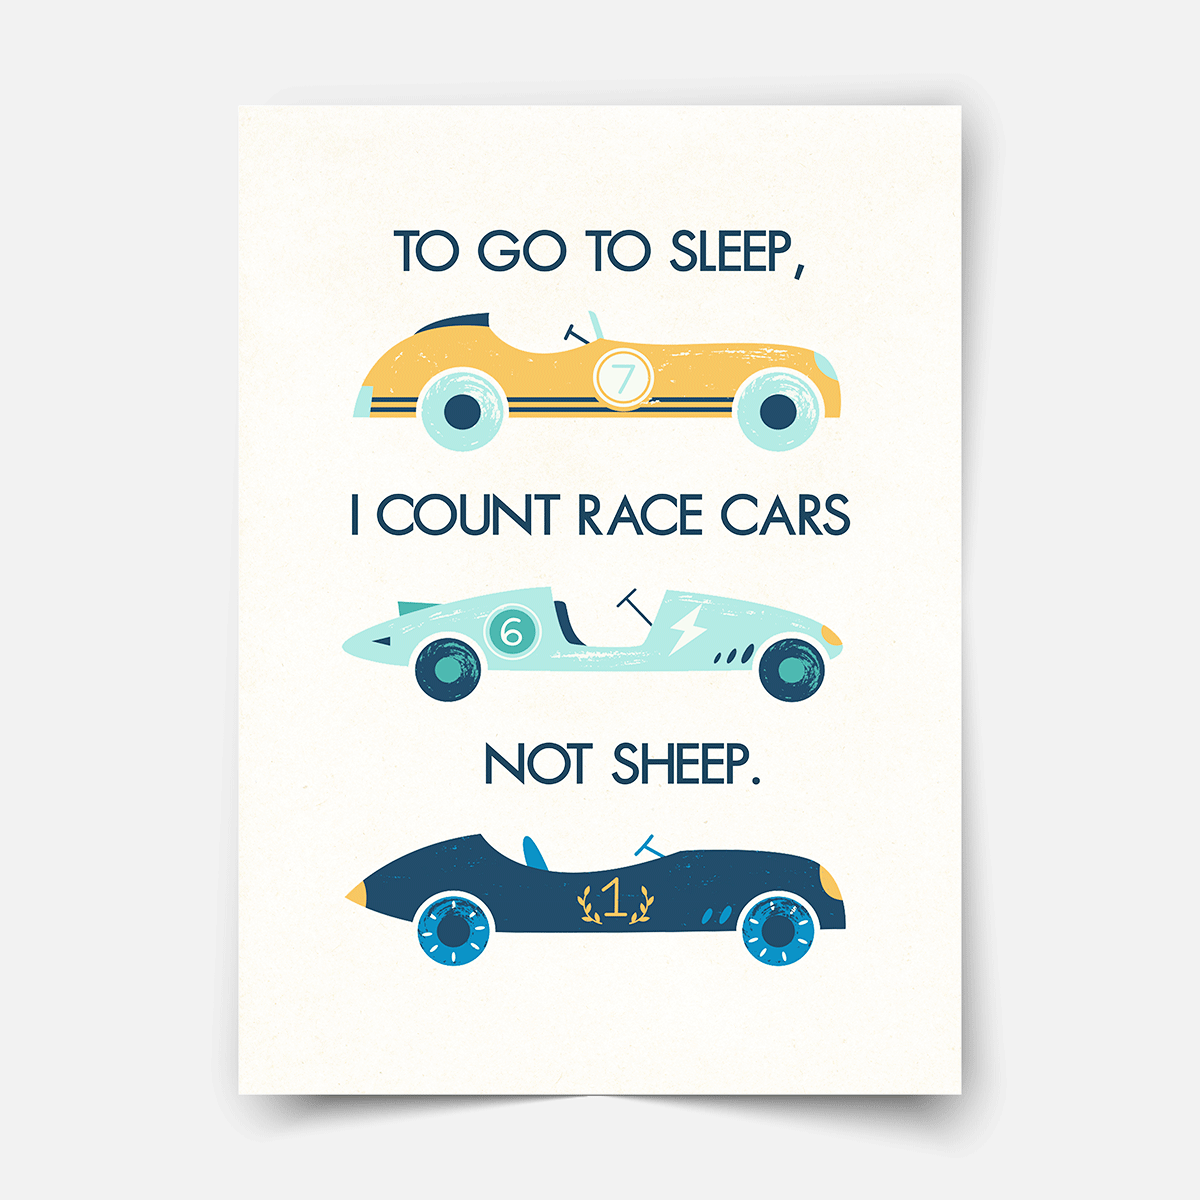 To go to sleep I count race cars - Poster